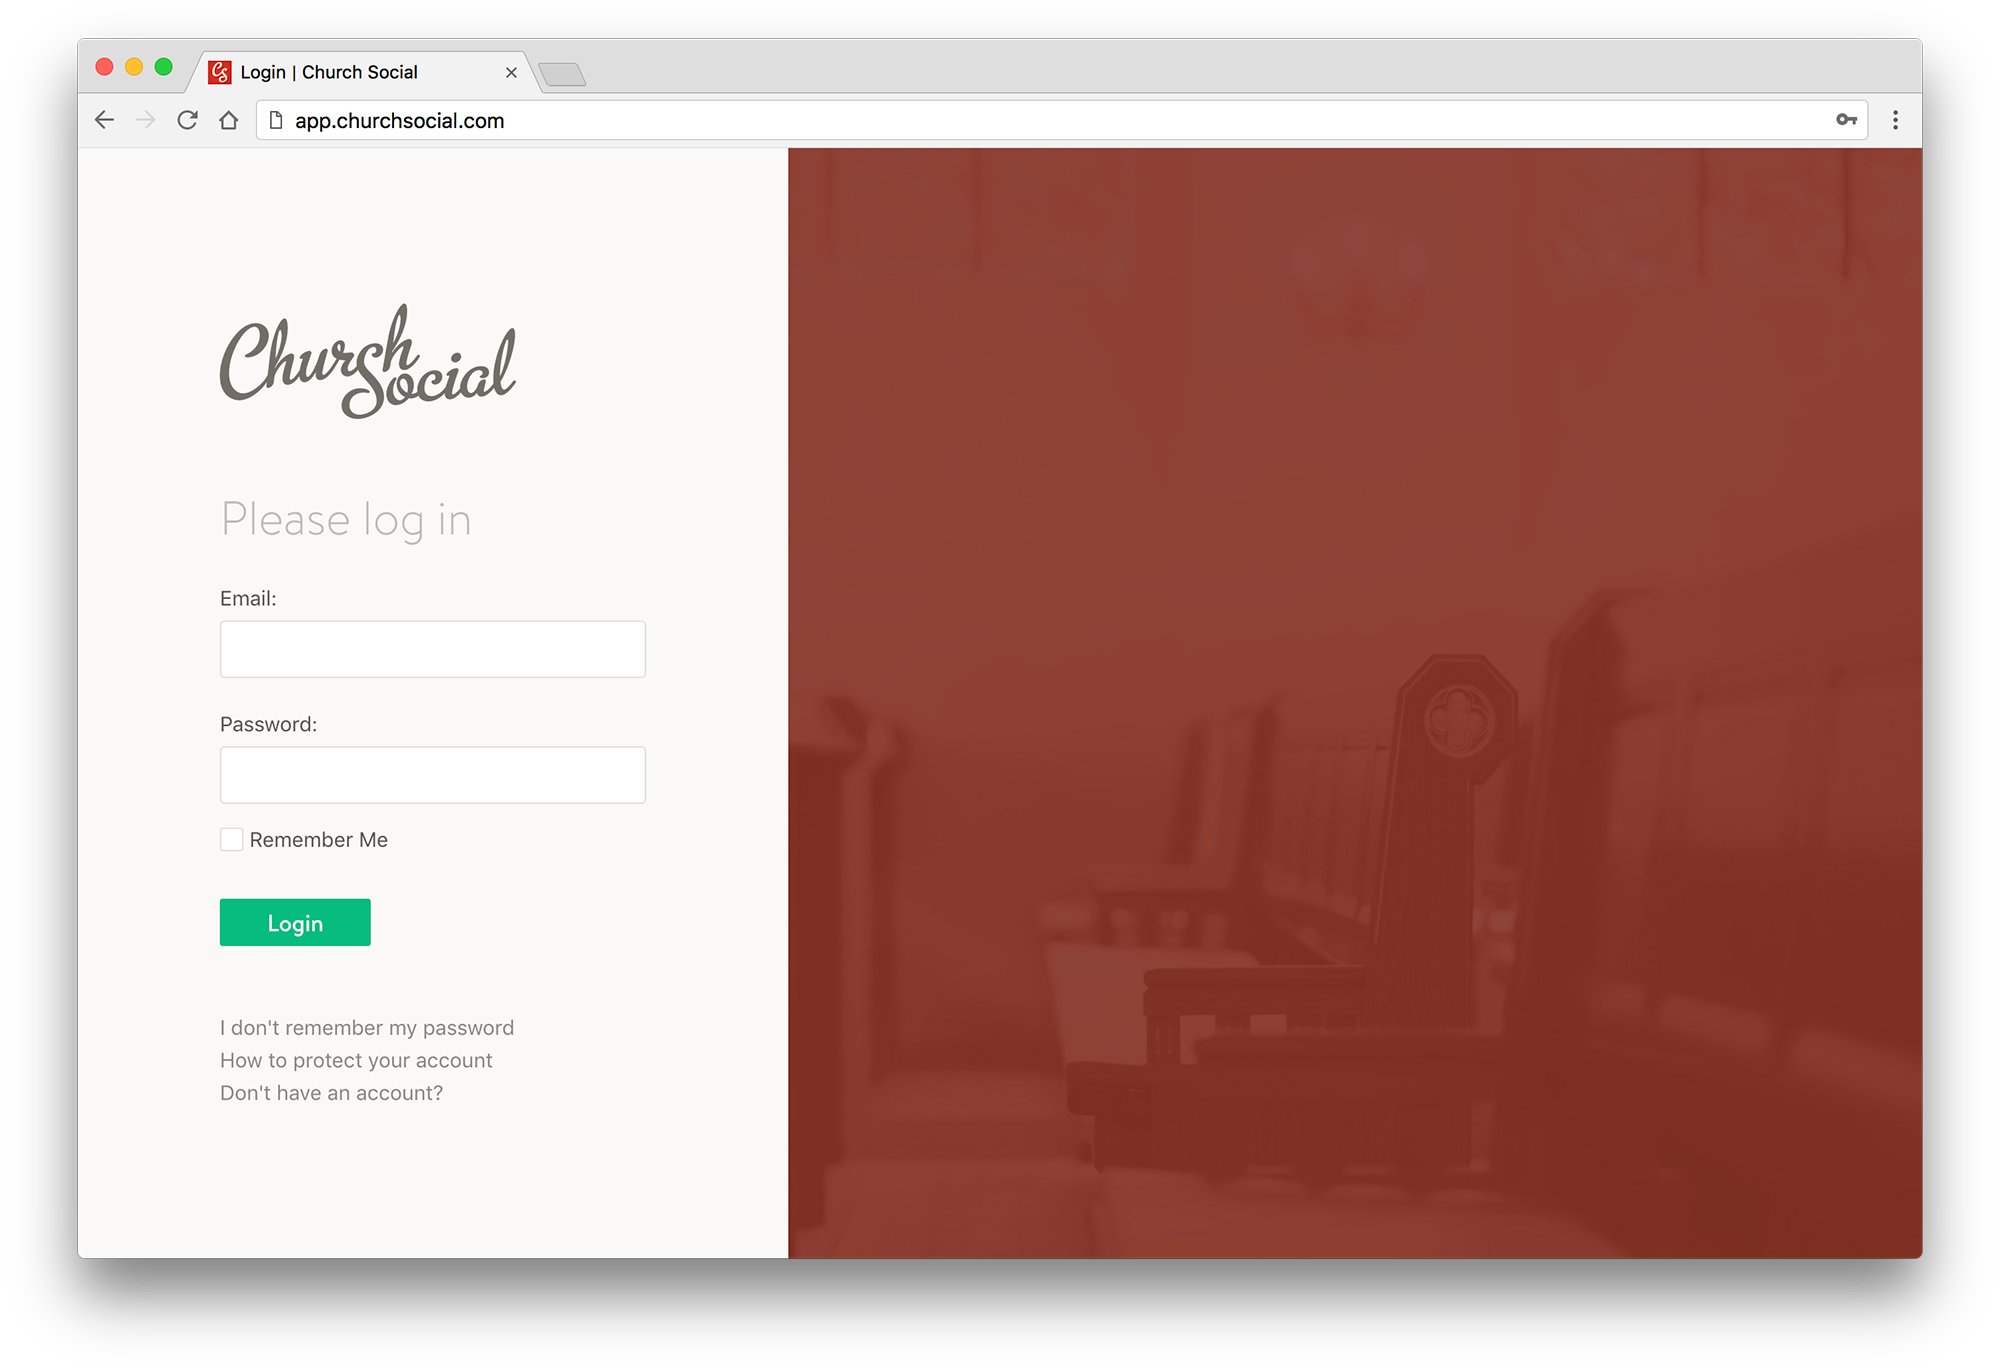 Screenshot of the redesigned Church Social login page